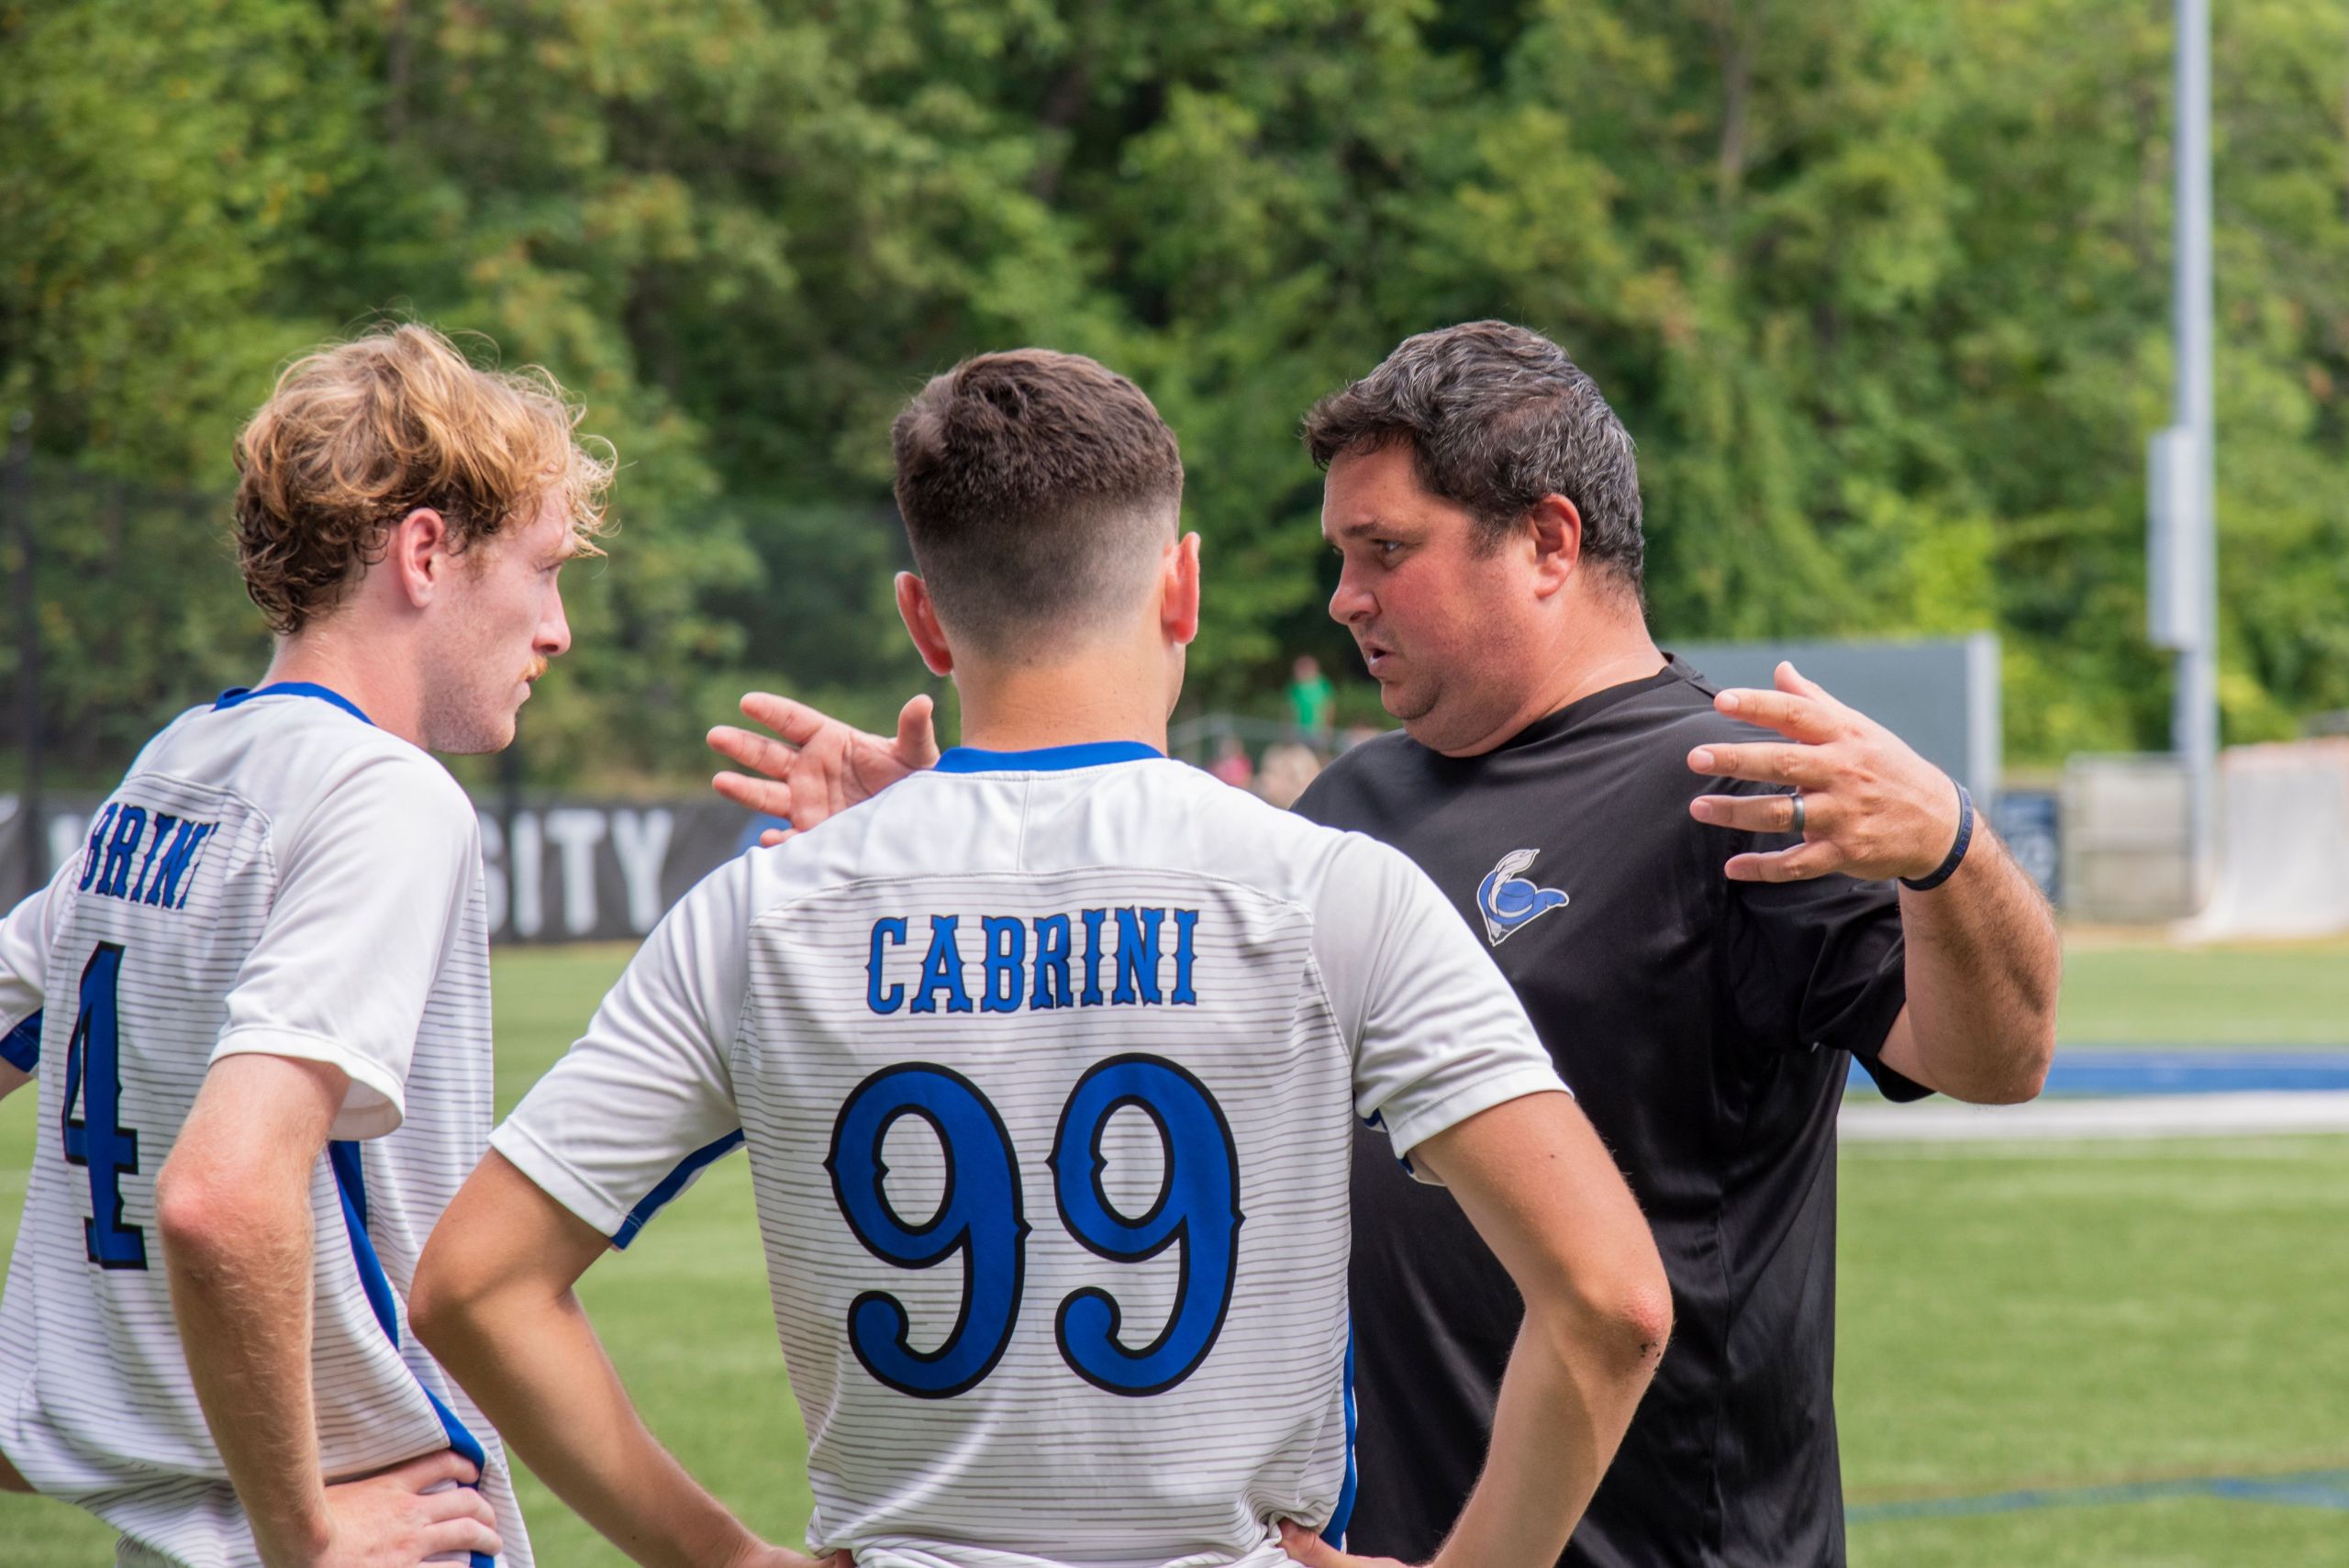 Head Coach of Cabrini men's soccer, Rob Dallas, and his players before the game. Photo by Linda Johnson.